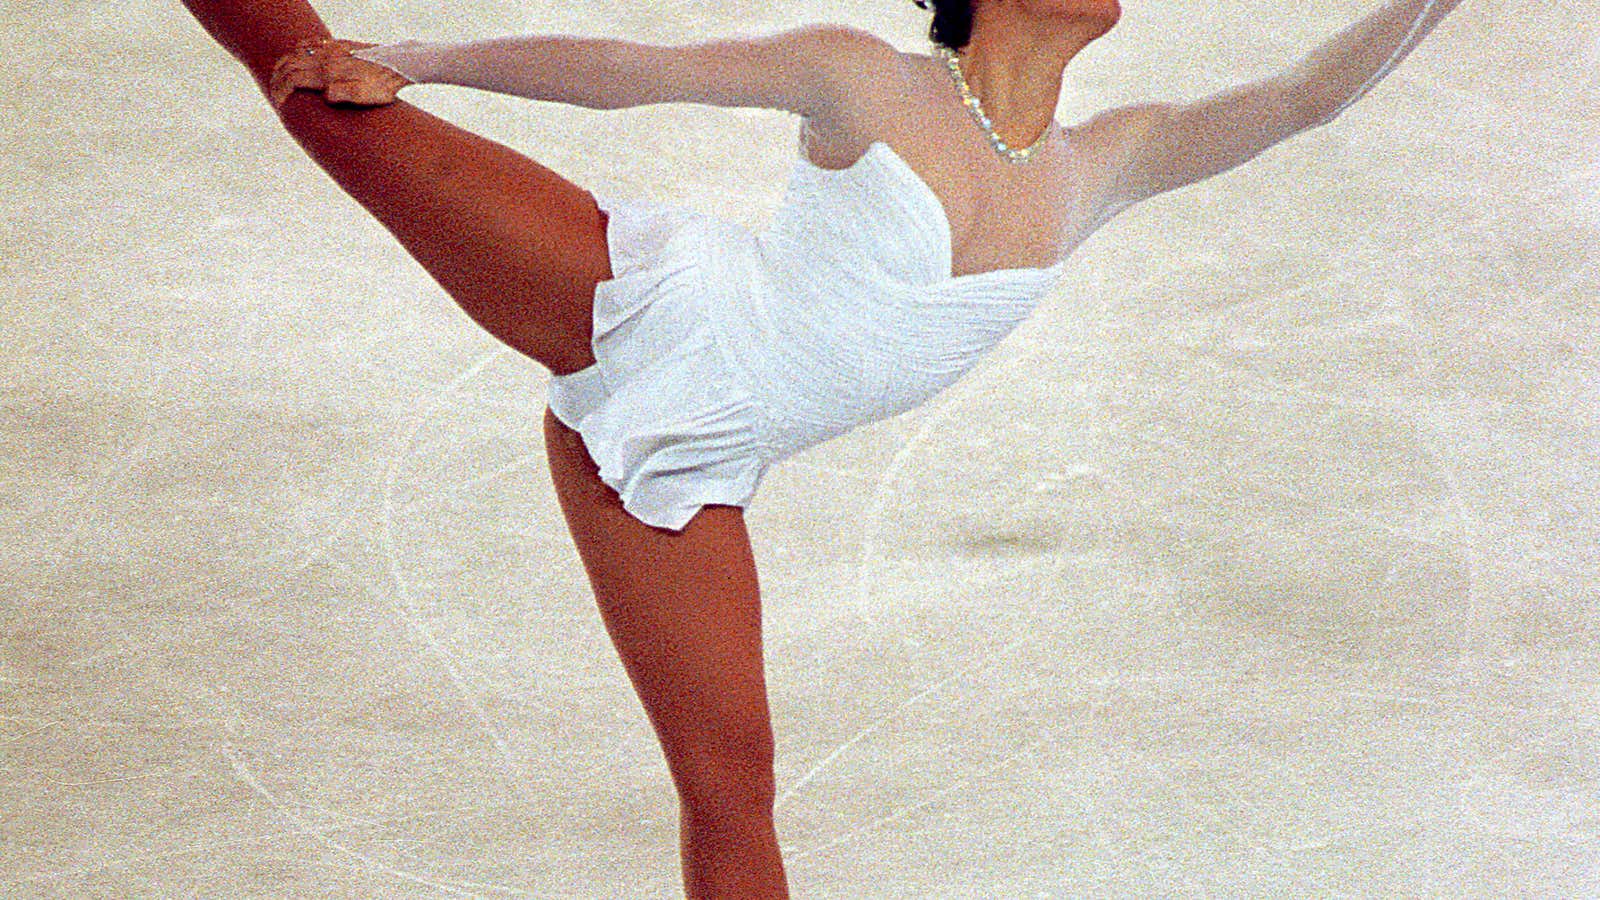 Nancy Kerrigan competing at the 1994 Winter Olympics in a wedding dress-inspired costume by Vera Wang.